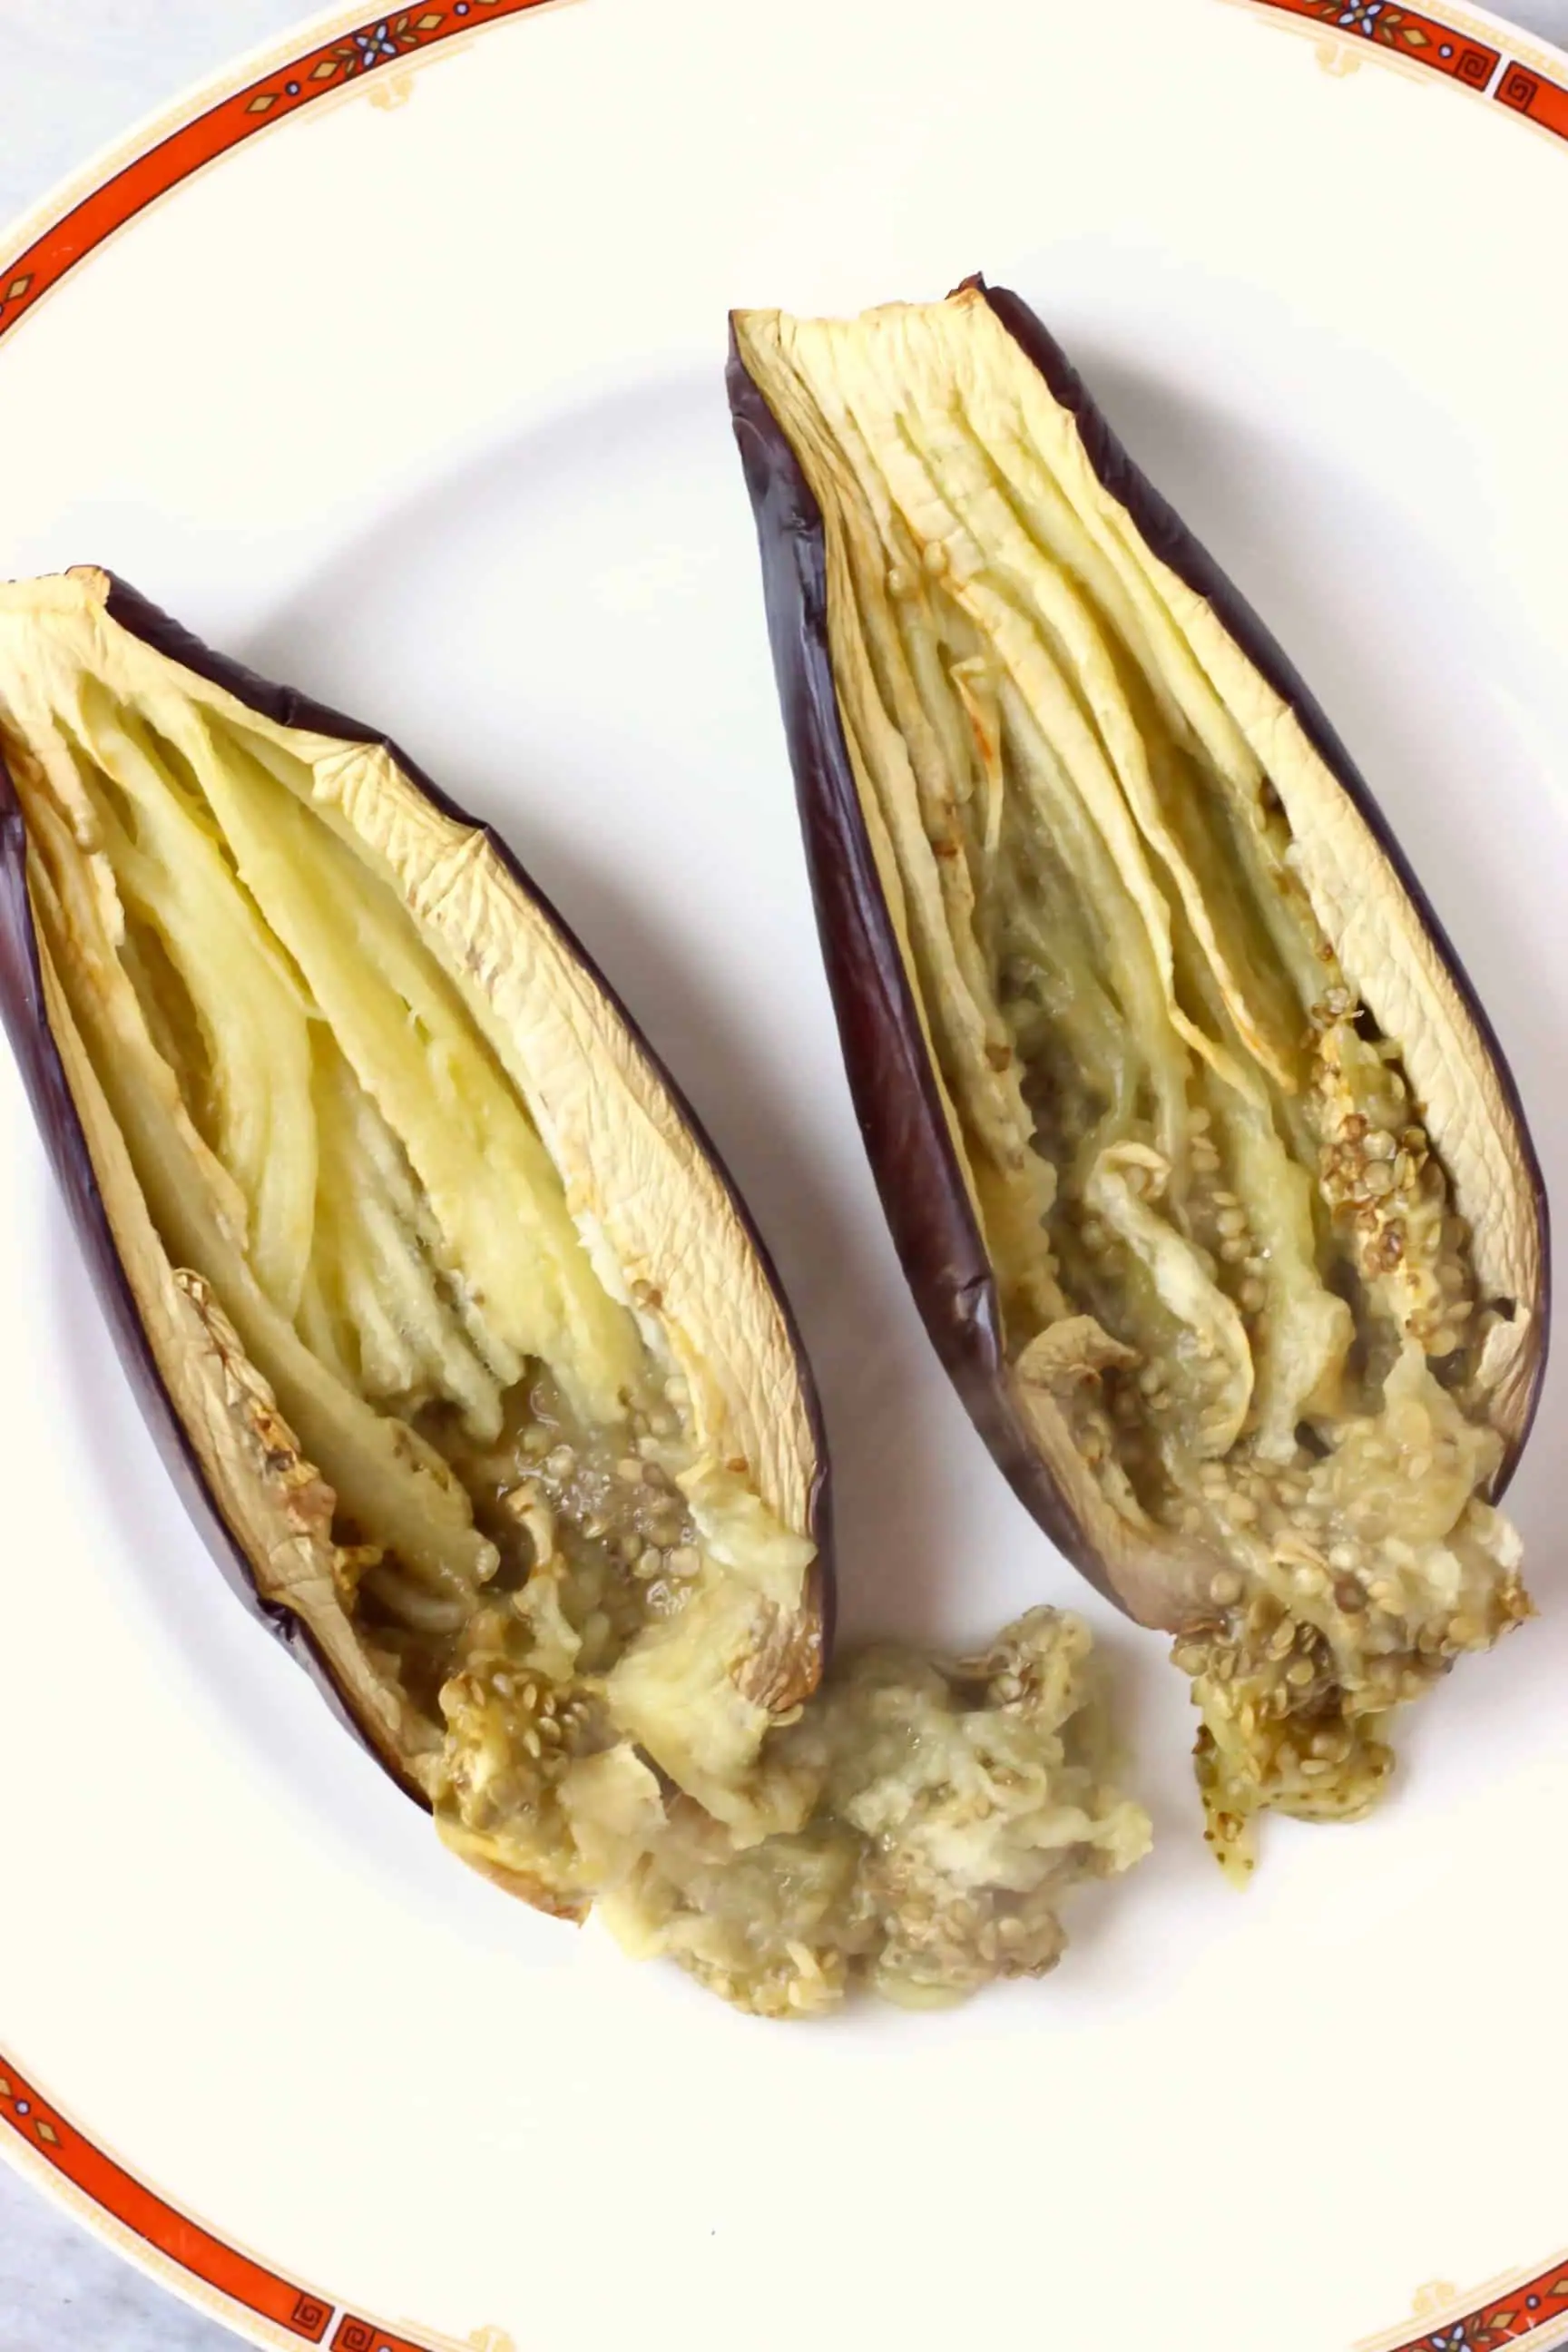 Two roasted eggplant halves being shredded on a white plate